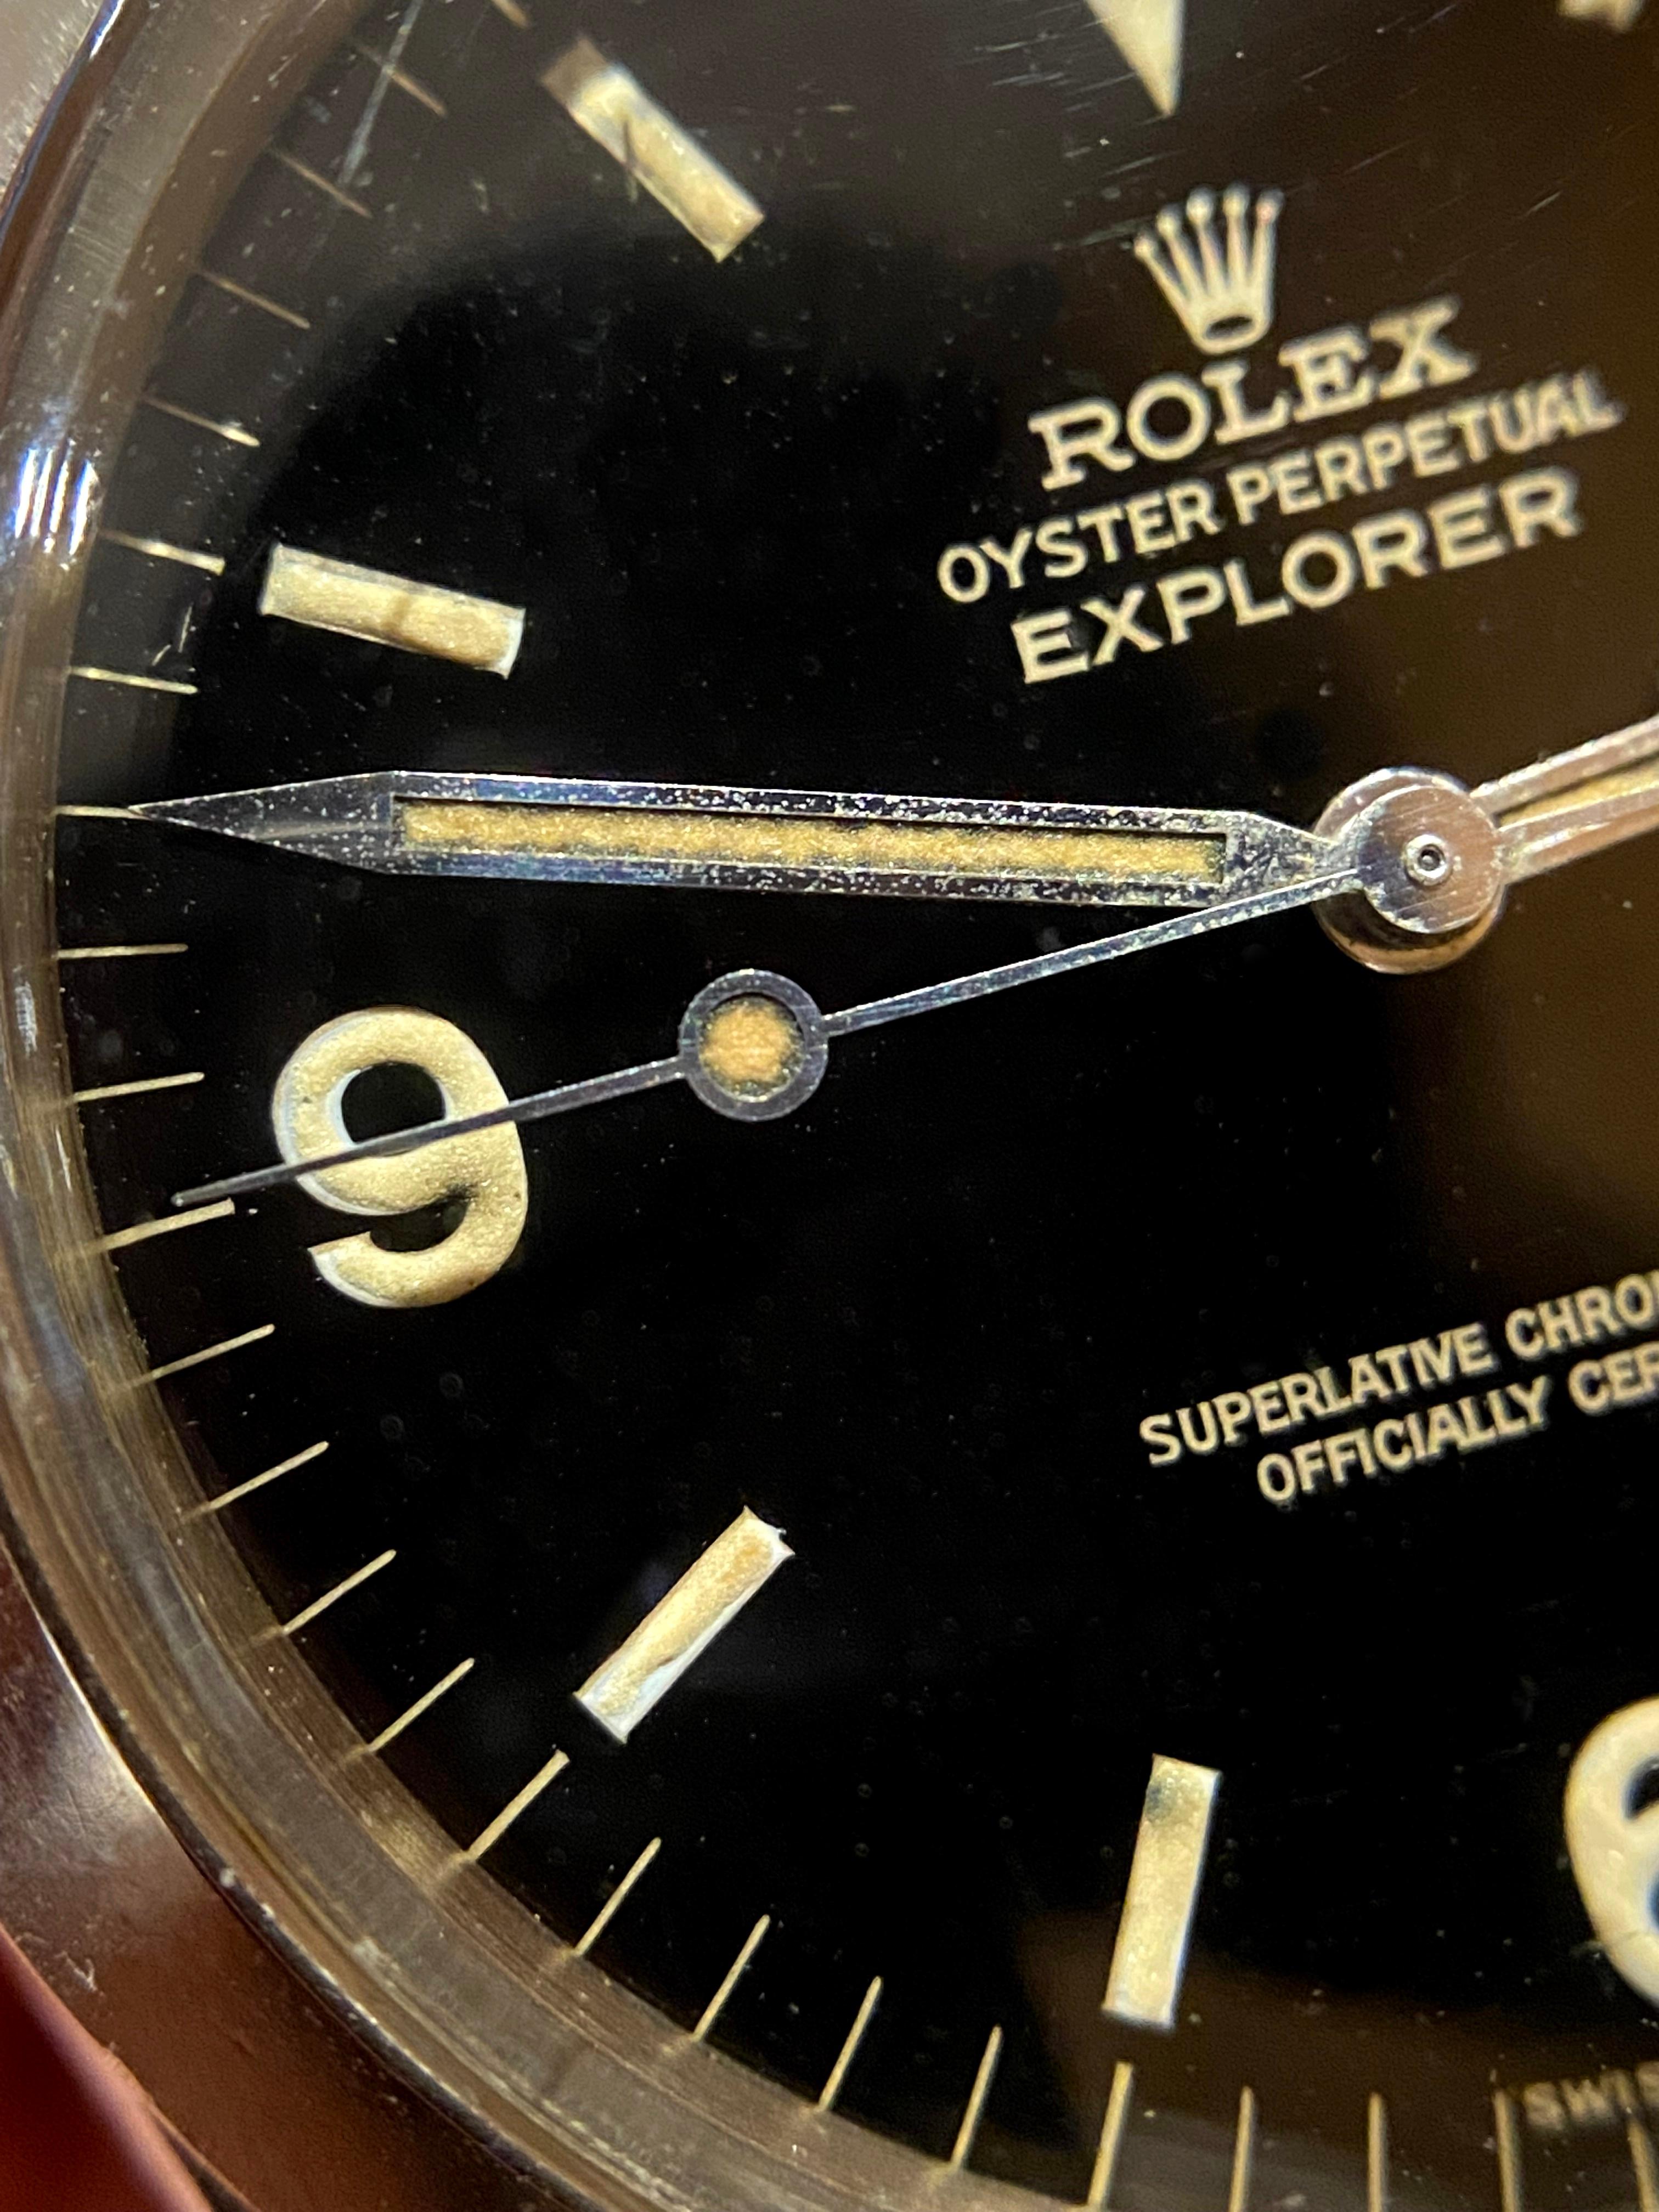 Rolex Oyster Perpetual Explorer Gilt Glossy Dial 1016 Steel Automatic Watch 1966 4